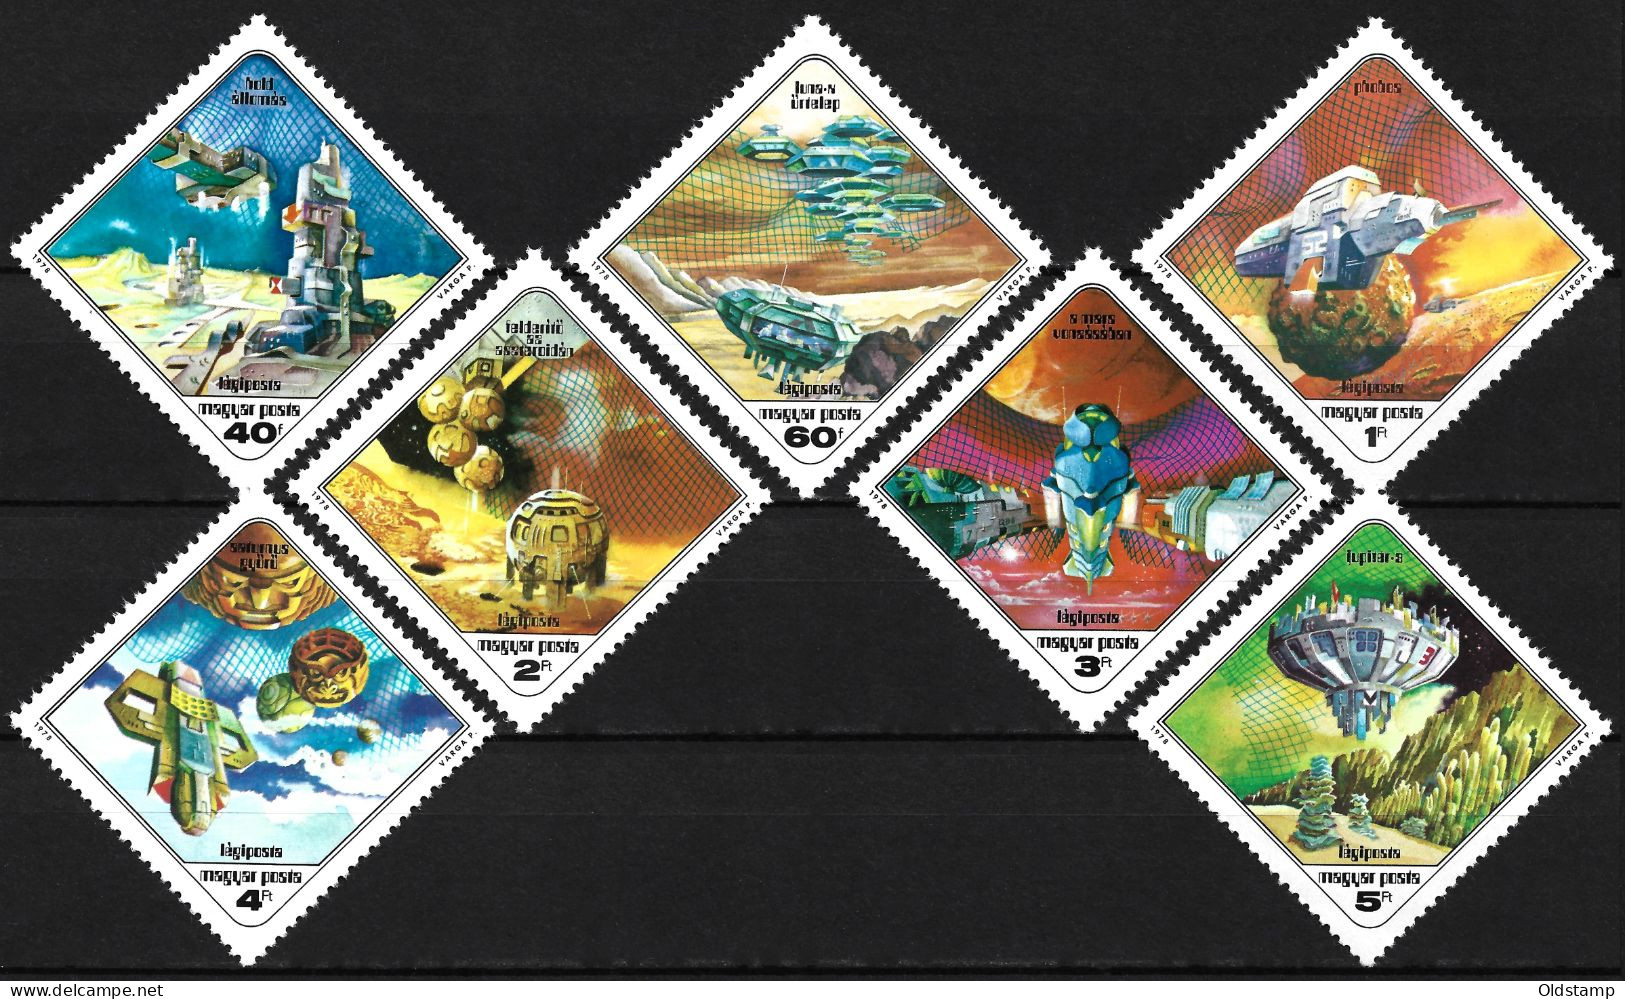 SPACE HUNGARY 1978 Mi. 3265 - 3271 SPACE FUTURE FLIGHTS FANTASTICS SHIP ASTRONAUTS MNH Stamps FULL SET - Collections